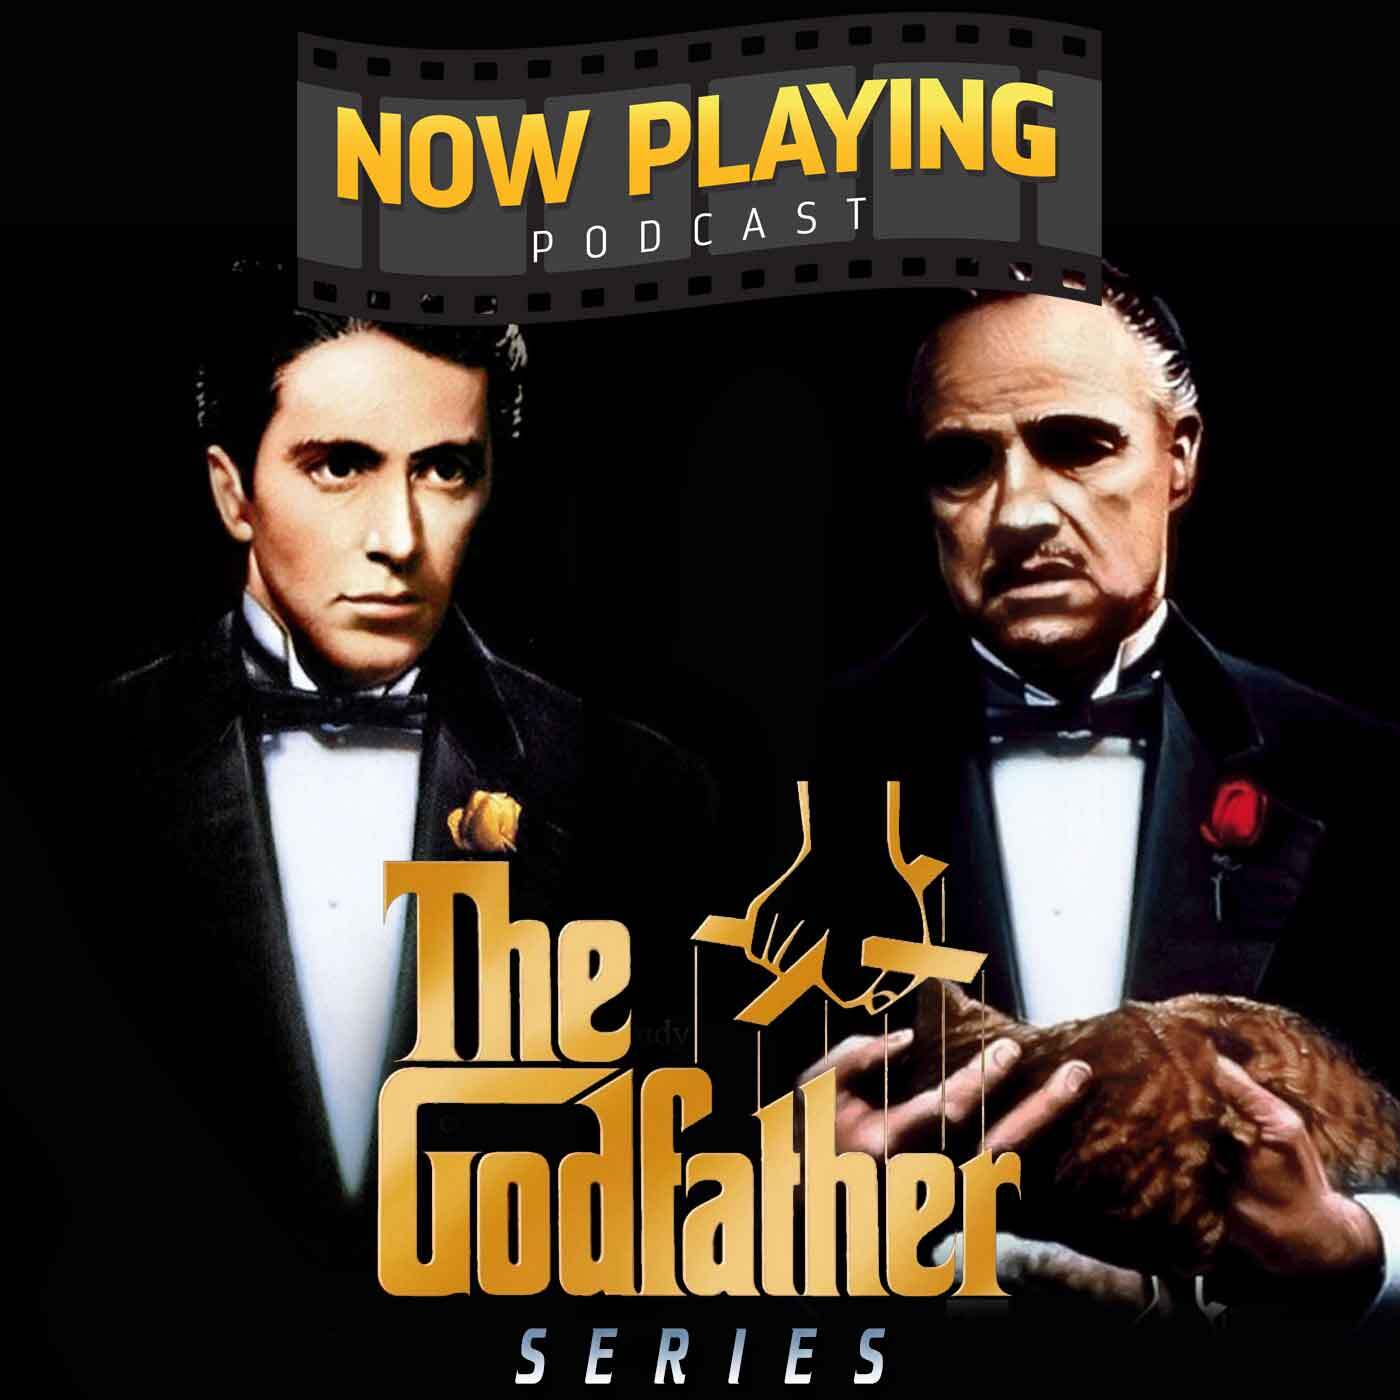 The Godfather Part III - For Annual Subscribers